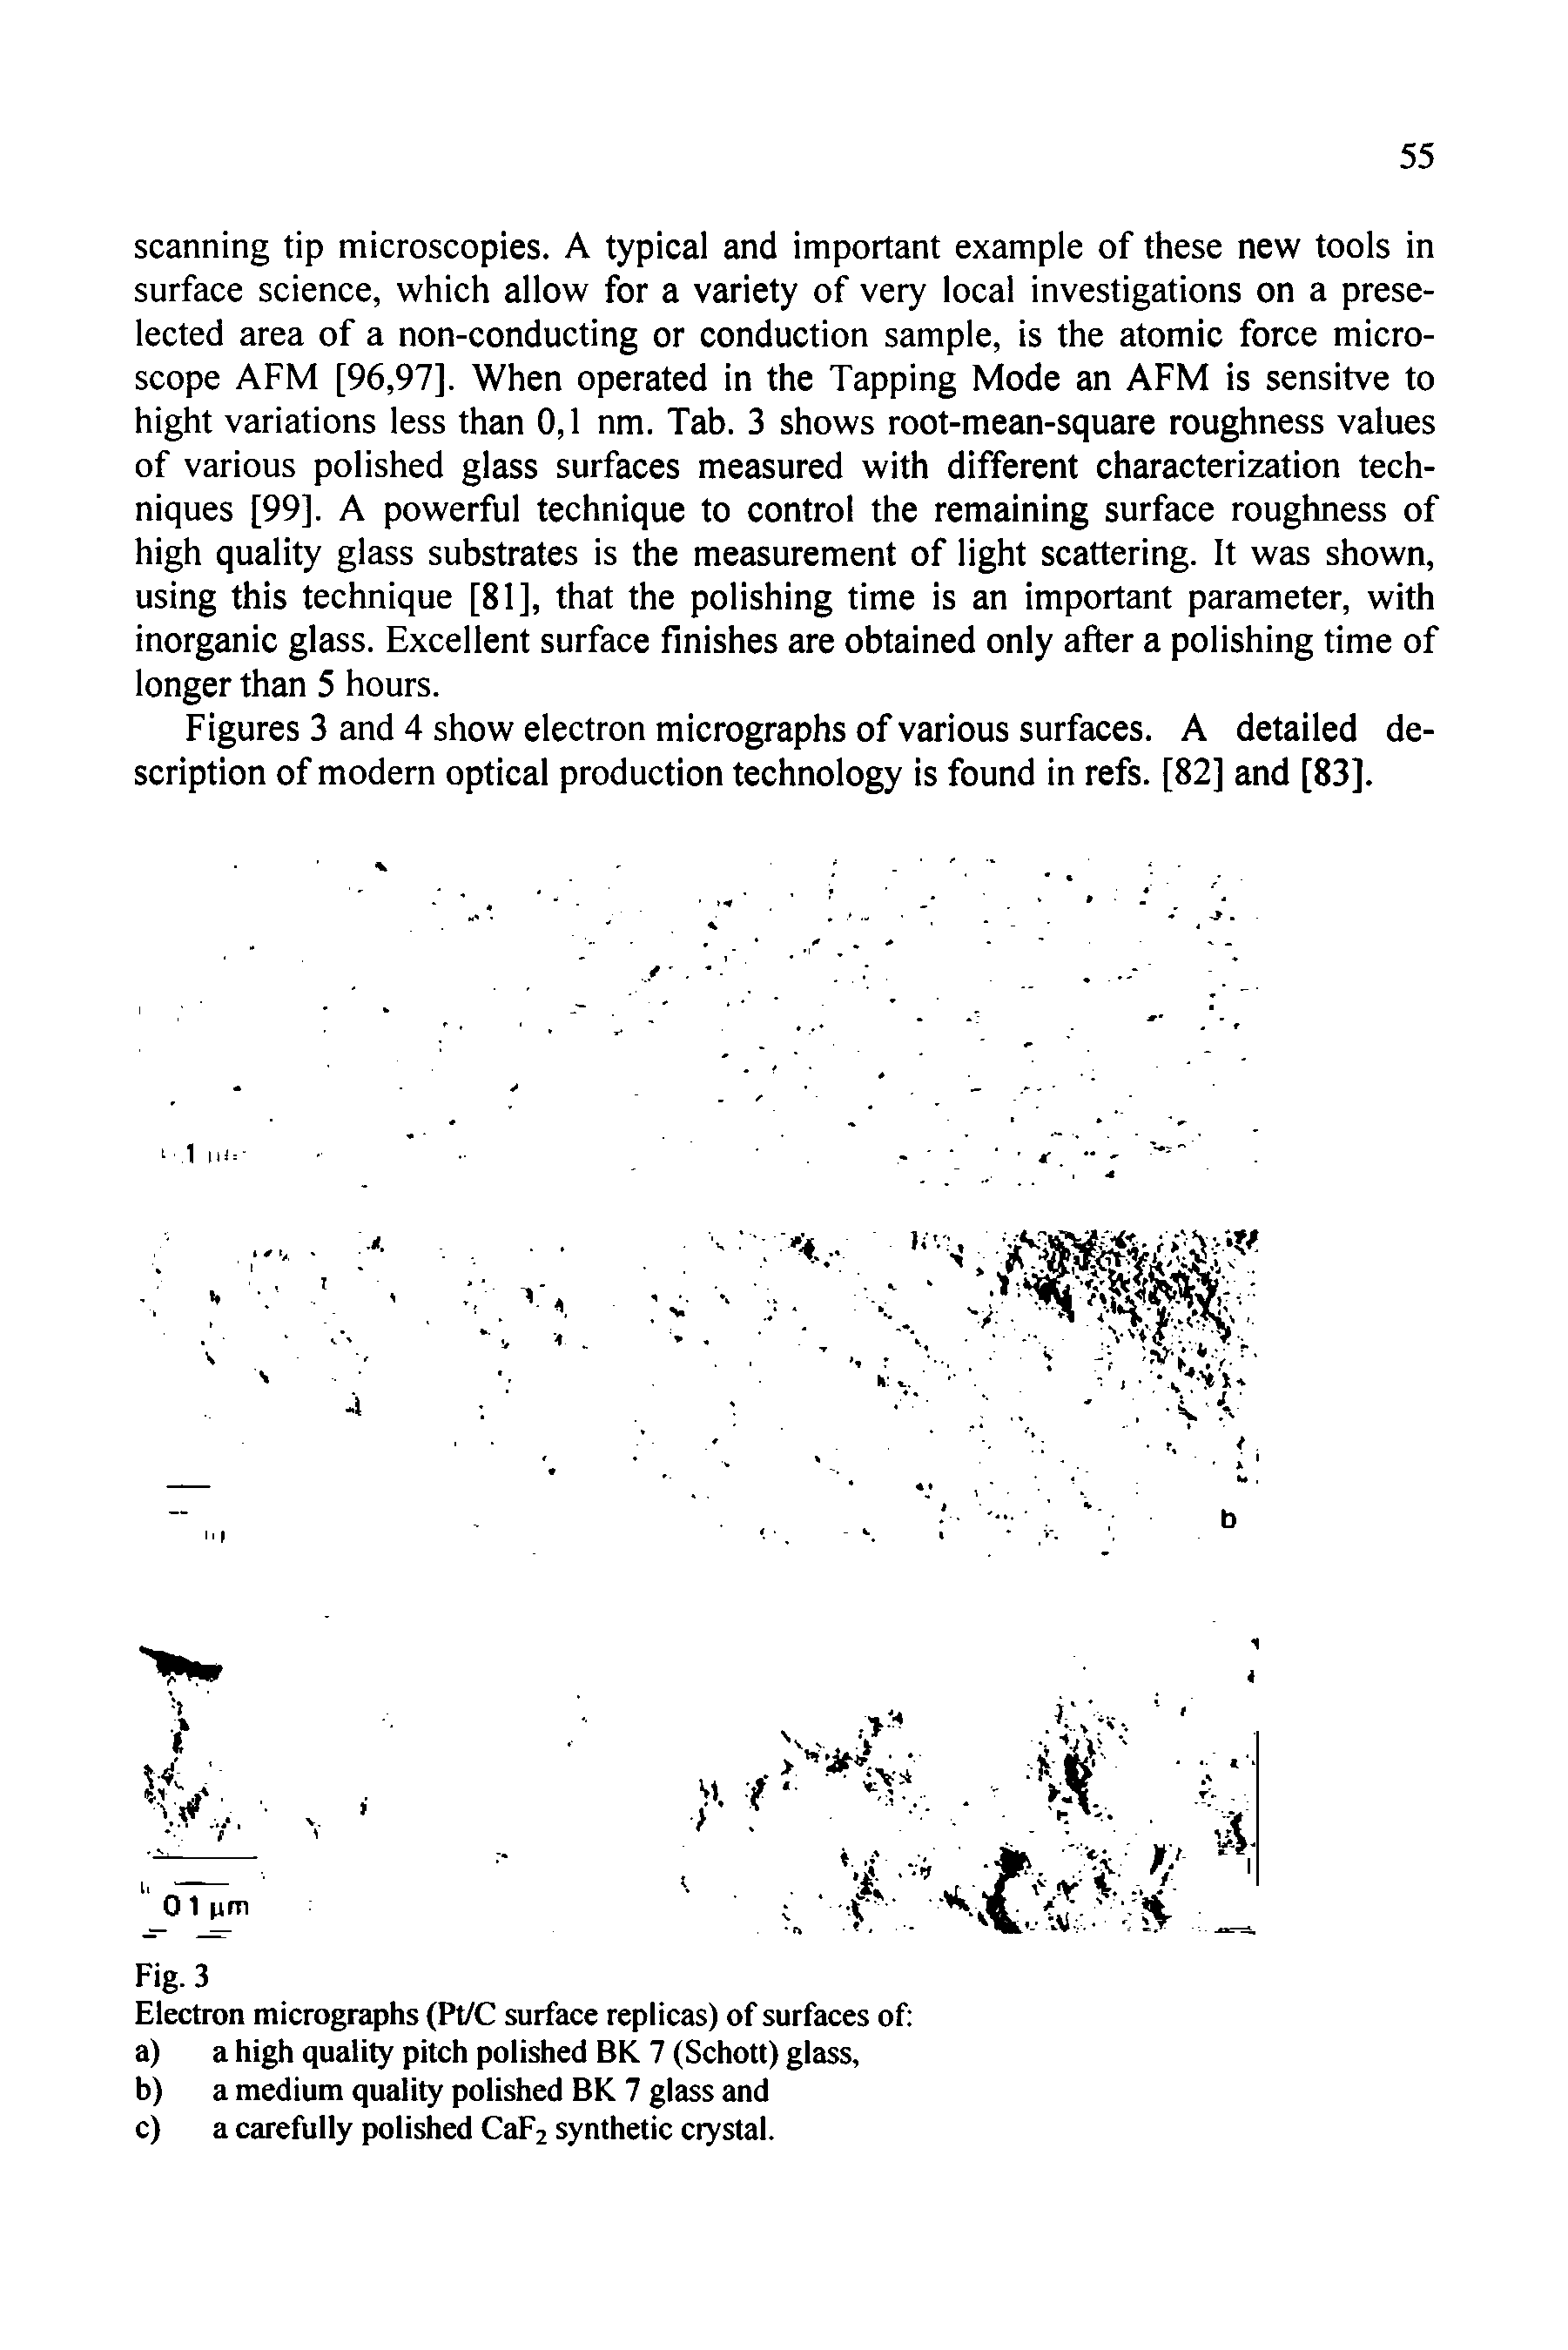 Figures 3 and 4 show electron micrographs of various surfaces. A detailed description of modern optical production technology is found in refs. [82] and [83].